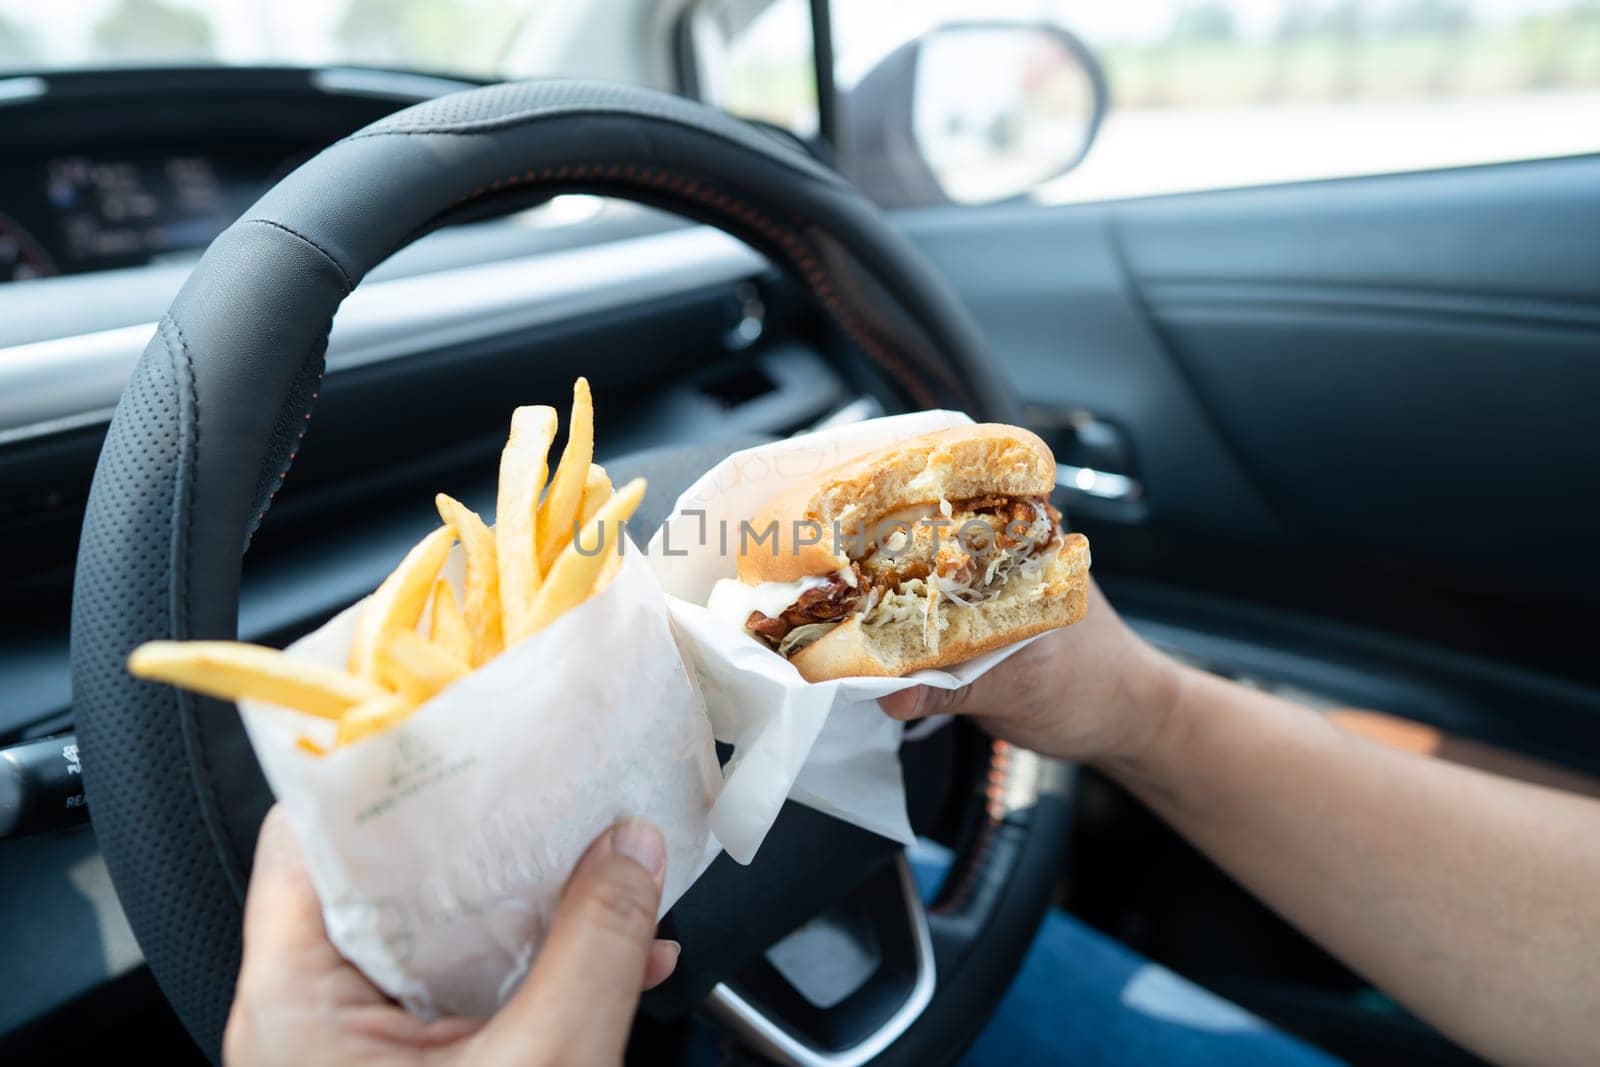 Asian lady holding hamburger and French fries to eat in car, dangerous and risk an accident. by pamai